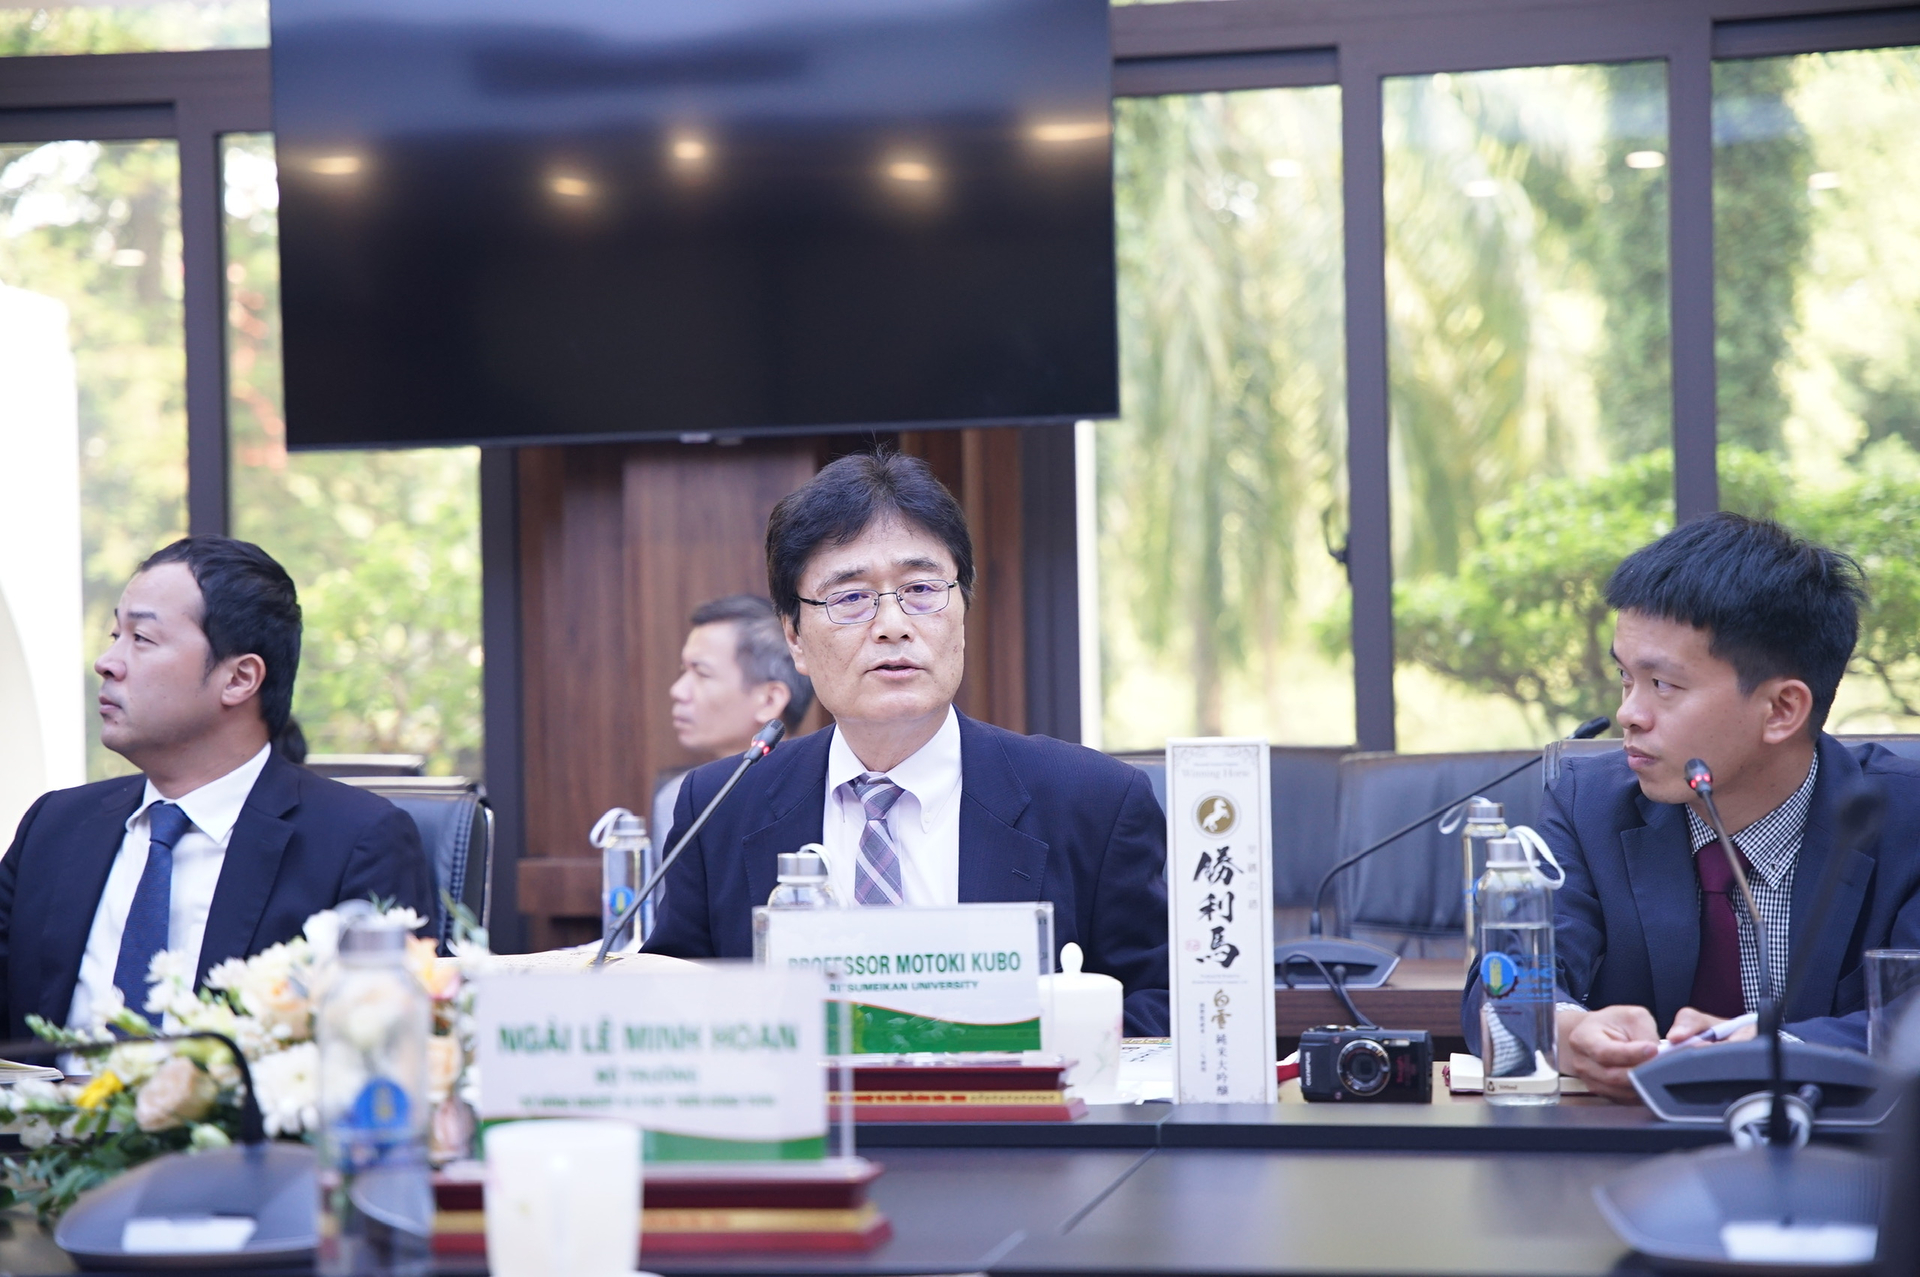 Prof. Motoki Kubo promises that the Japanese side will make every effort to effectively deploy SOFIX and SOFIX agricultural technologies in Vietnam and make this project a success.